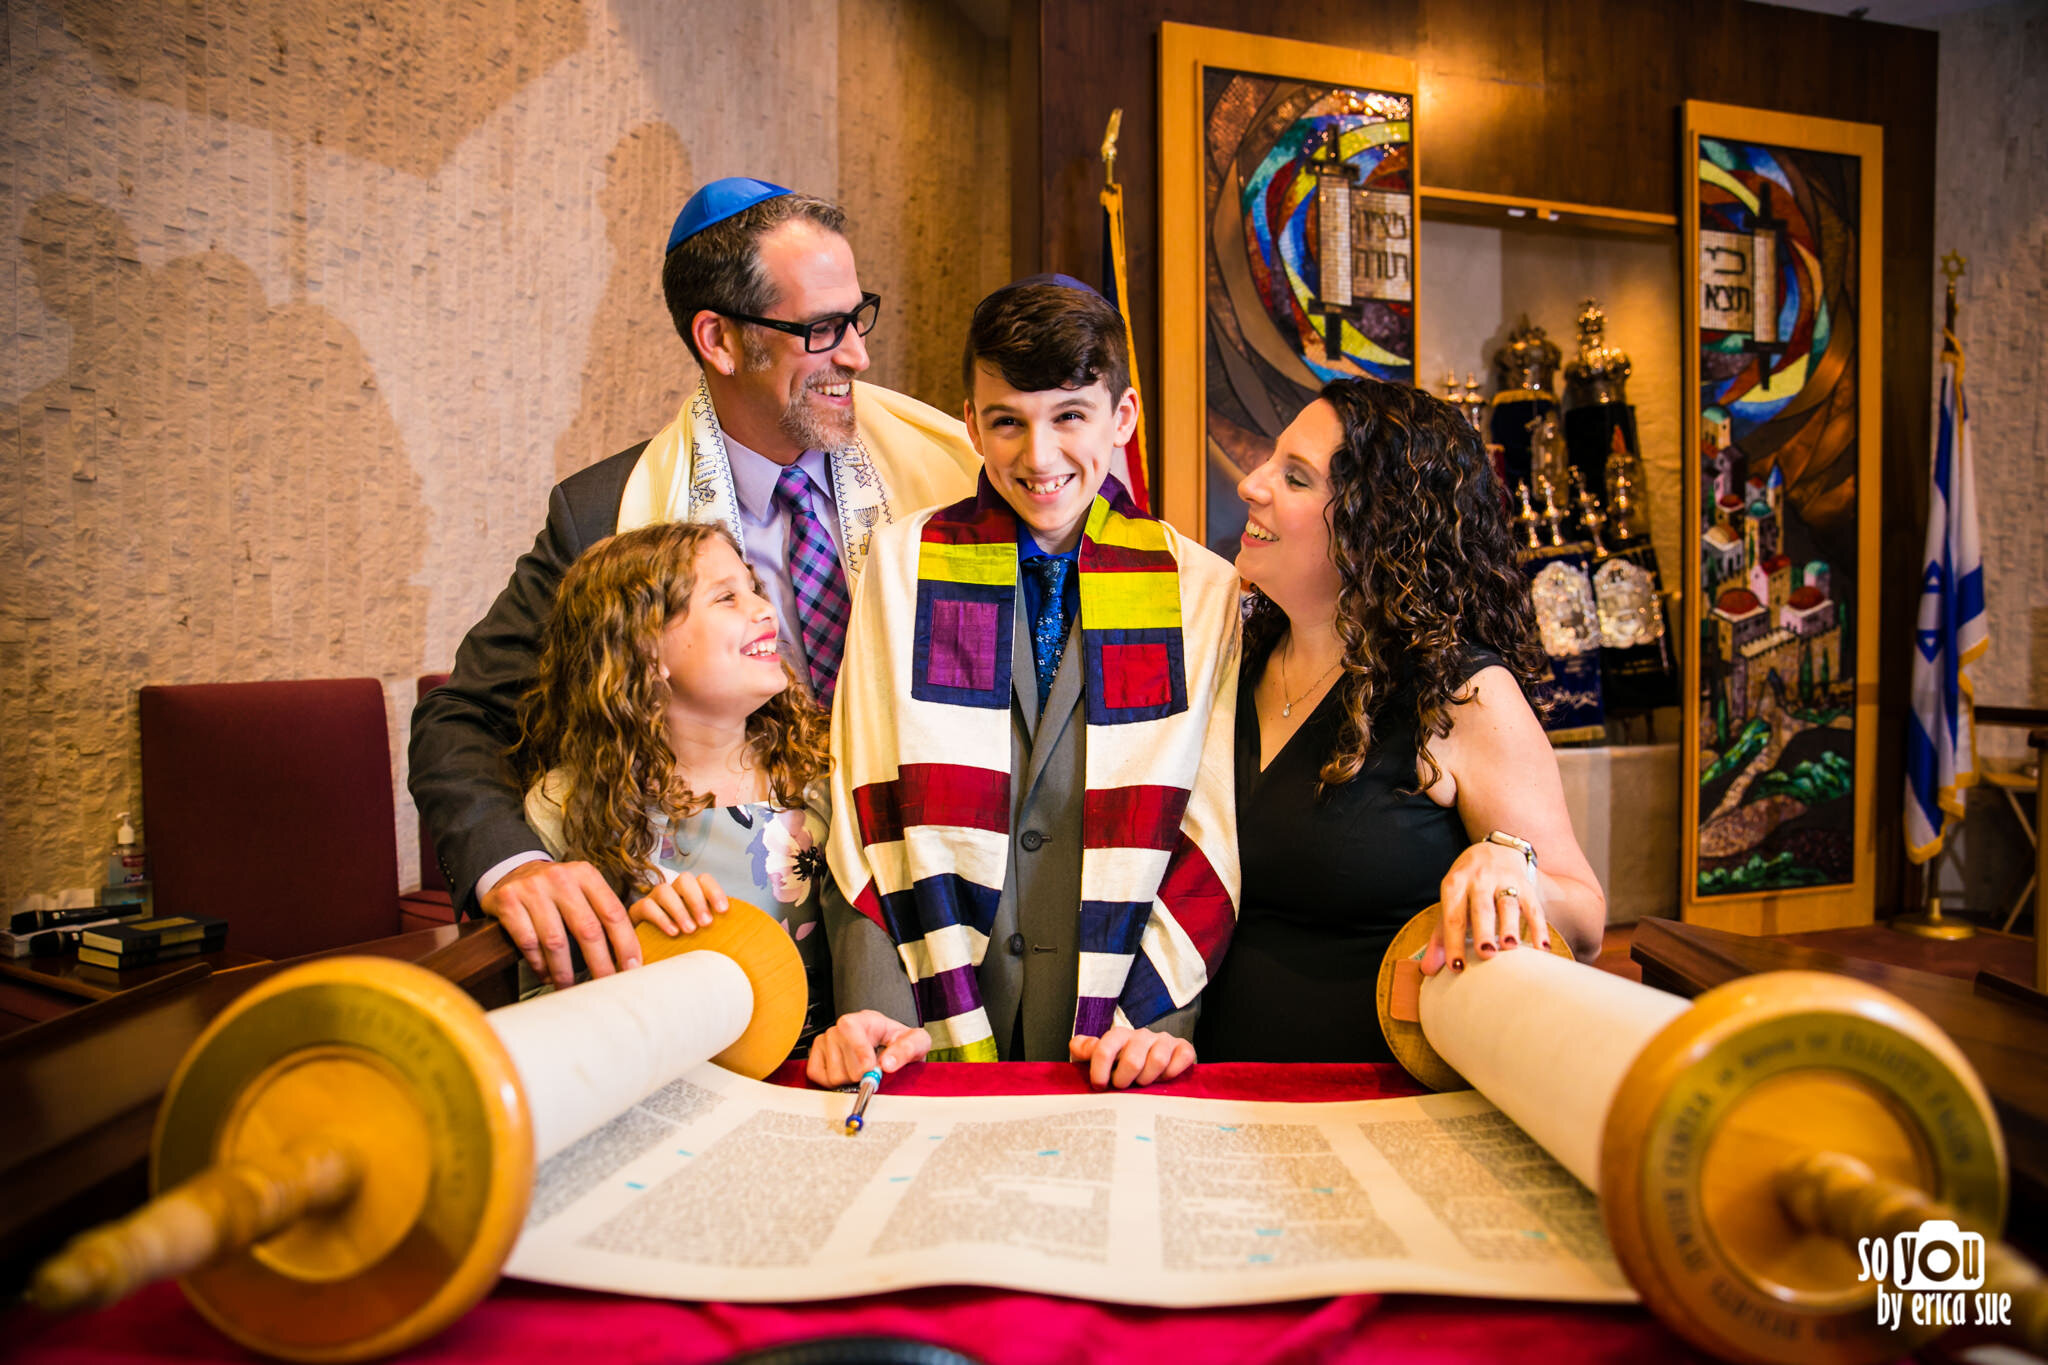 2-so-you-by-erica-sue-bar-mitzvah-photographer-boca-pavilion-grille-3471.JPG